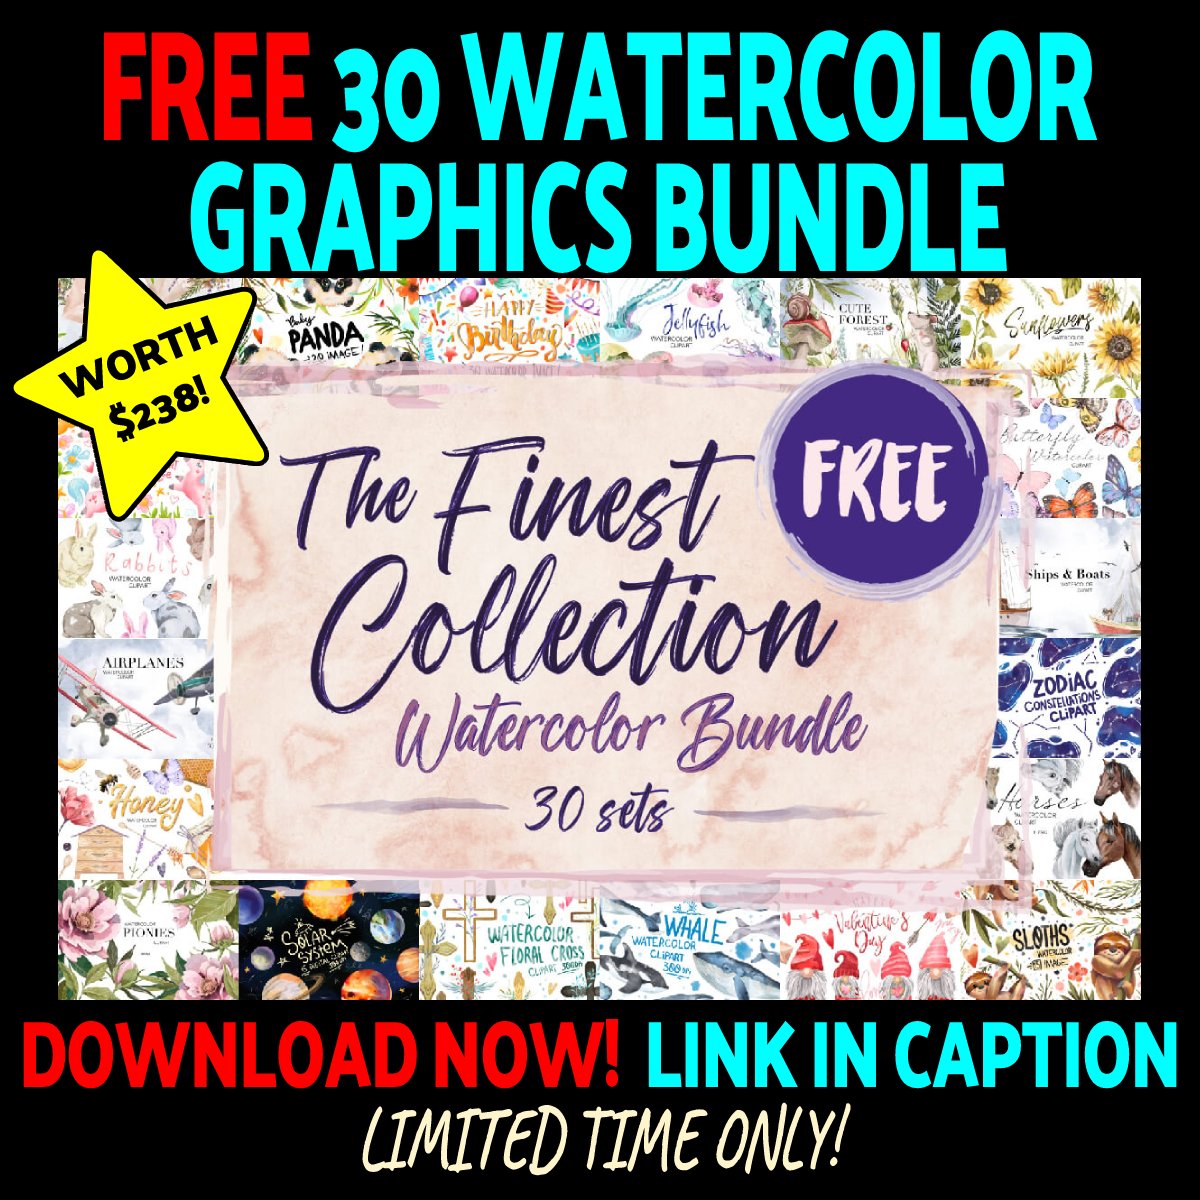 FREE Collection of 30 Watercolor bundles worth $238!
Hurry, download now before it expires.
creativefabrica.com/product/the-fi…

#graphicdesign #Giveaway #freestuff #clipart #freeclipart #watercolor #Watercolour #freegiveaway